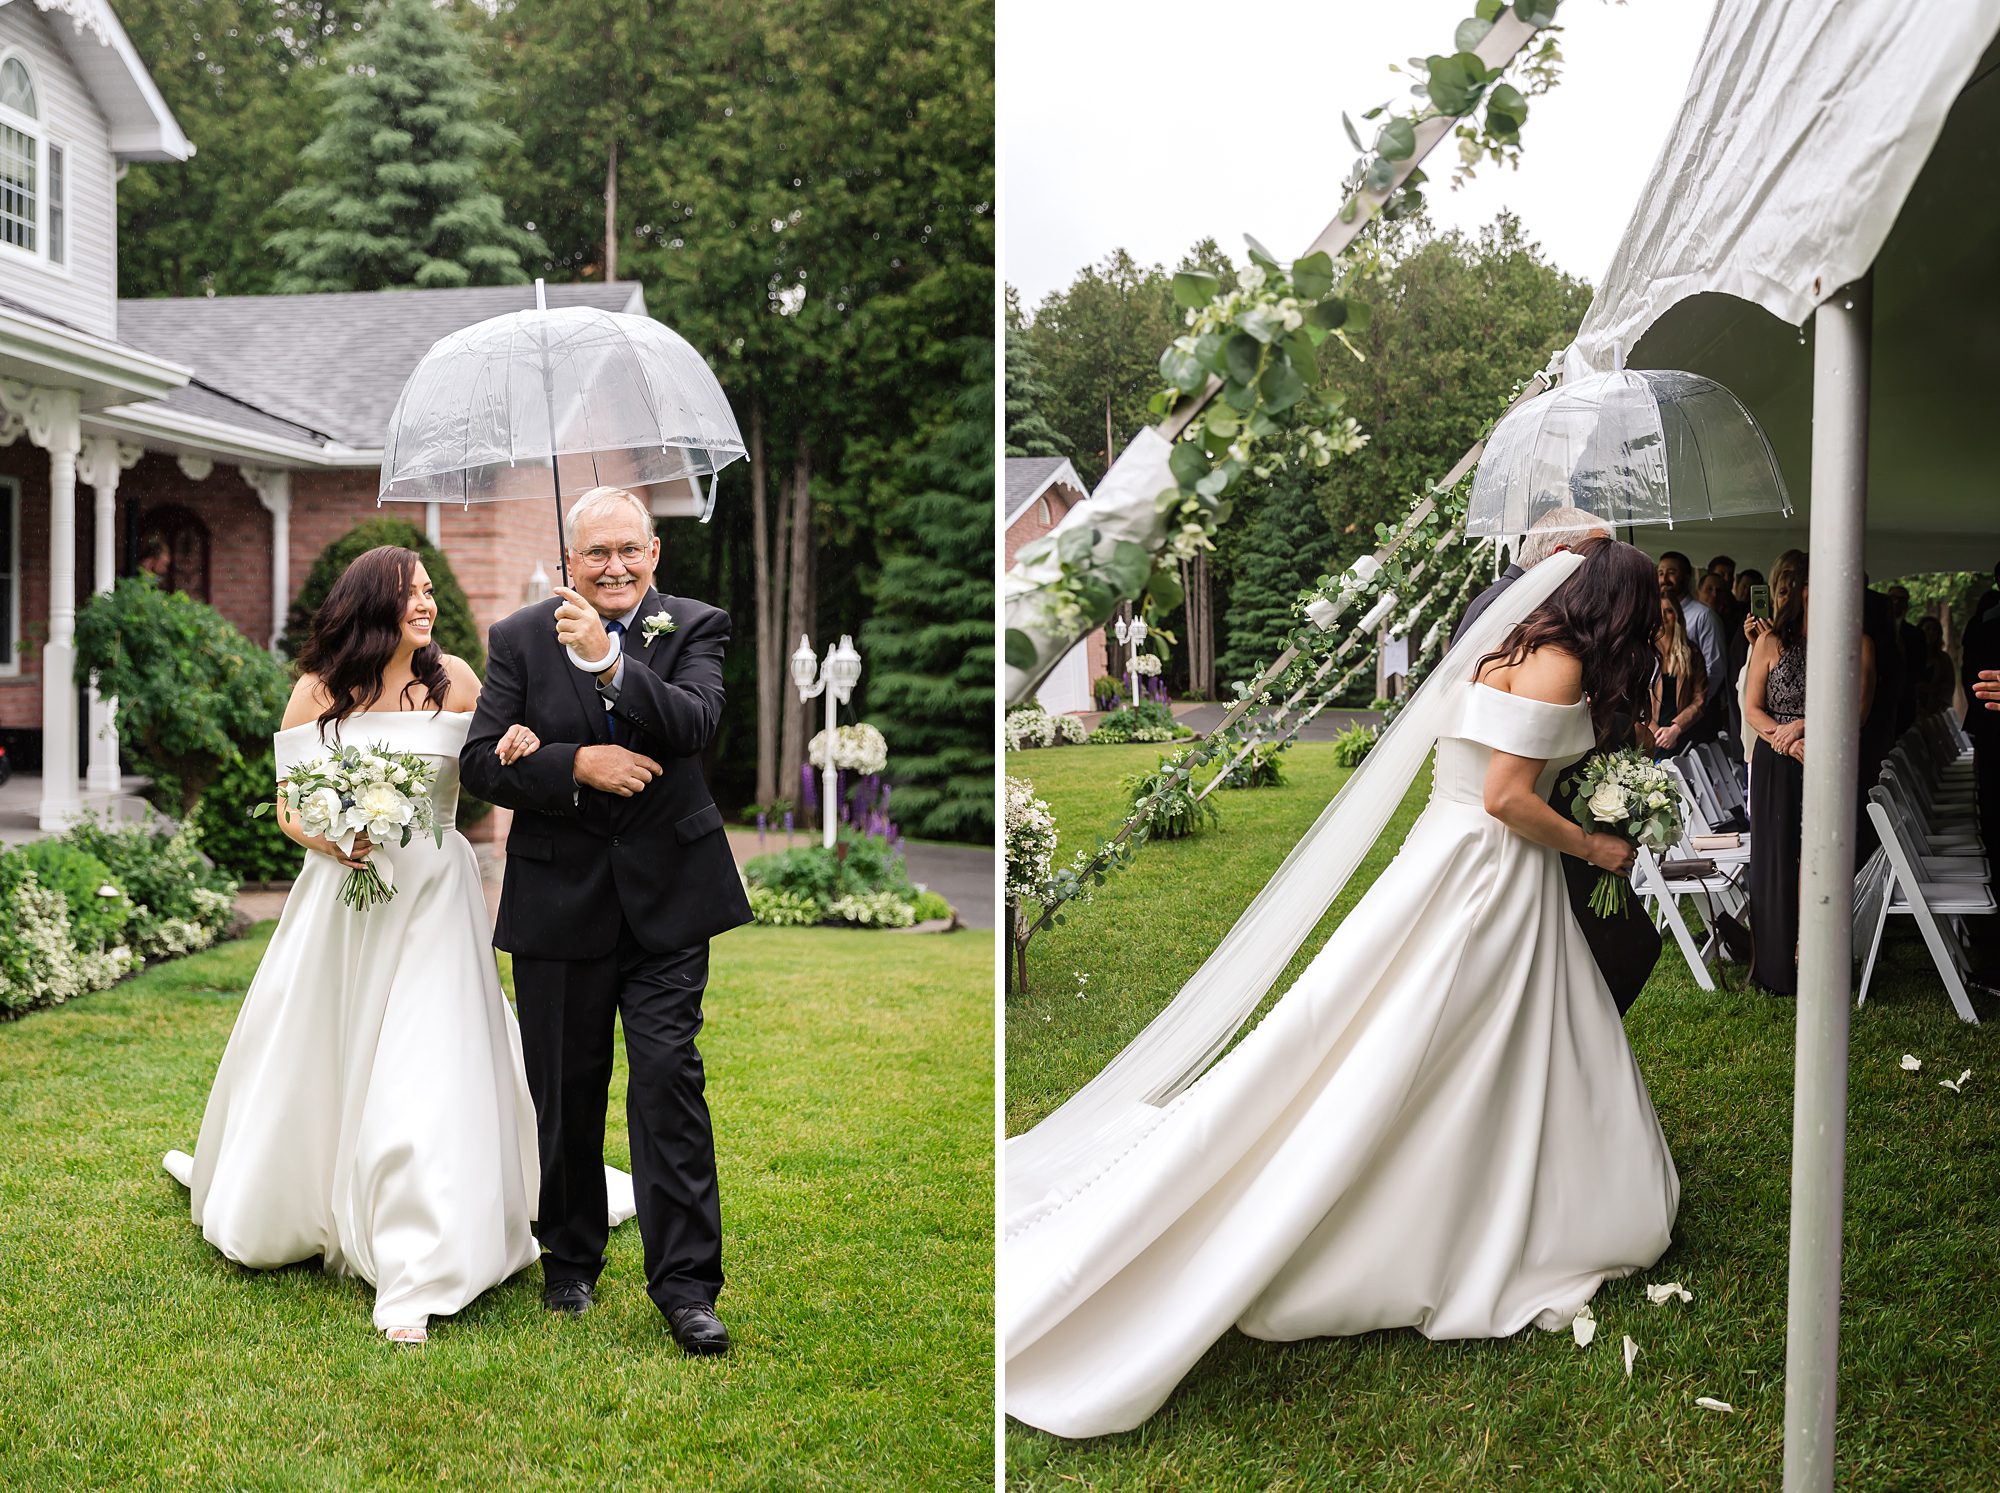 Bride and father walk down aisle during Outdoor Summer Wedding in Cornwall, ON